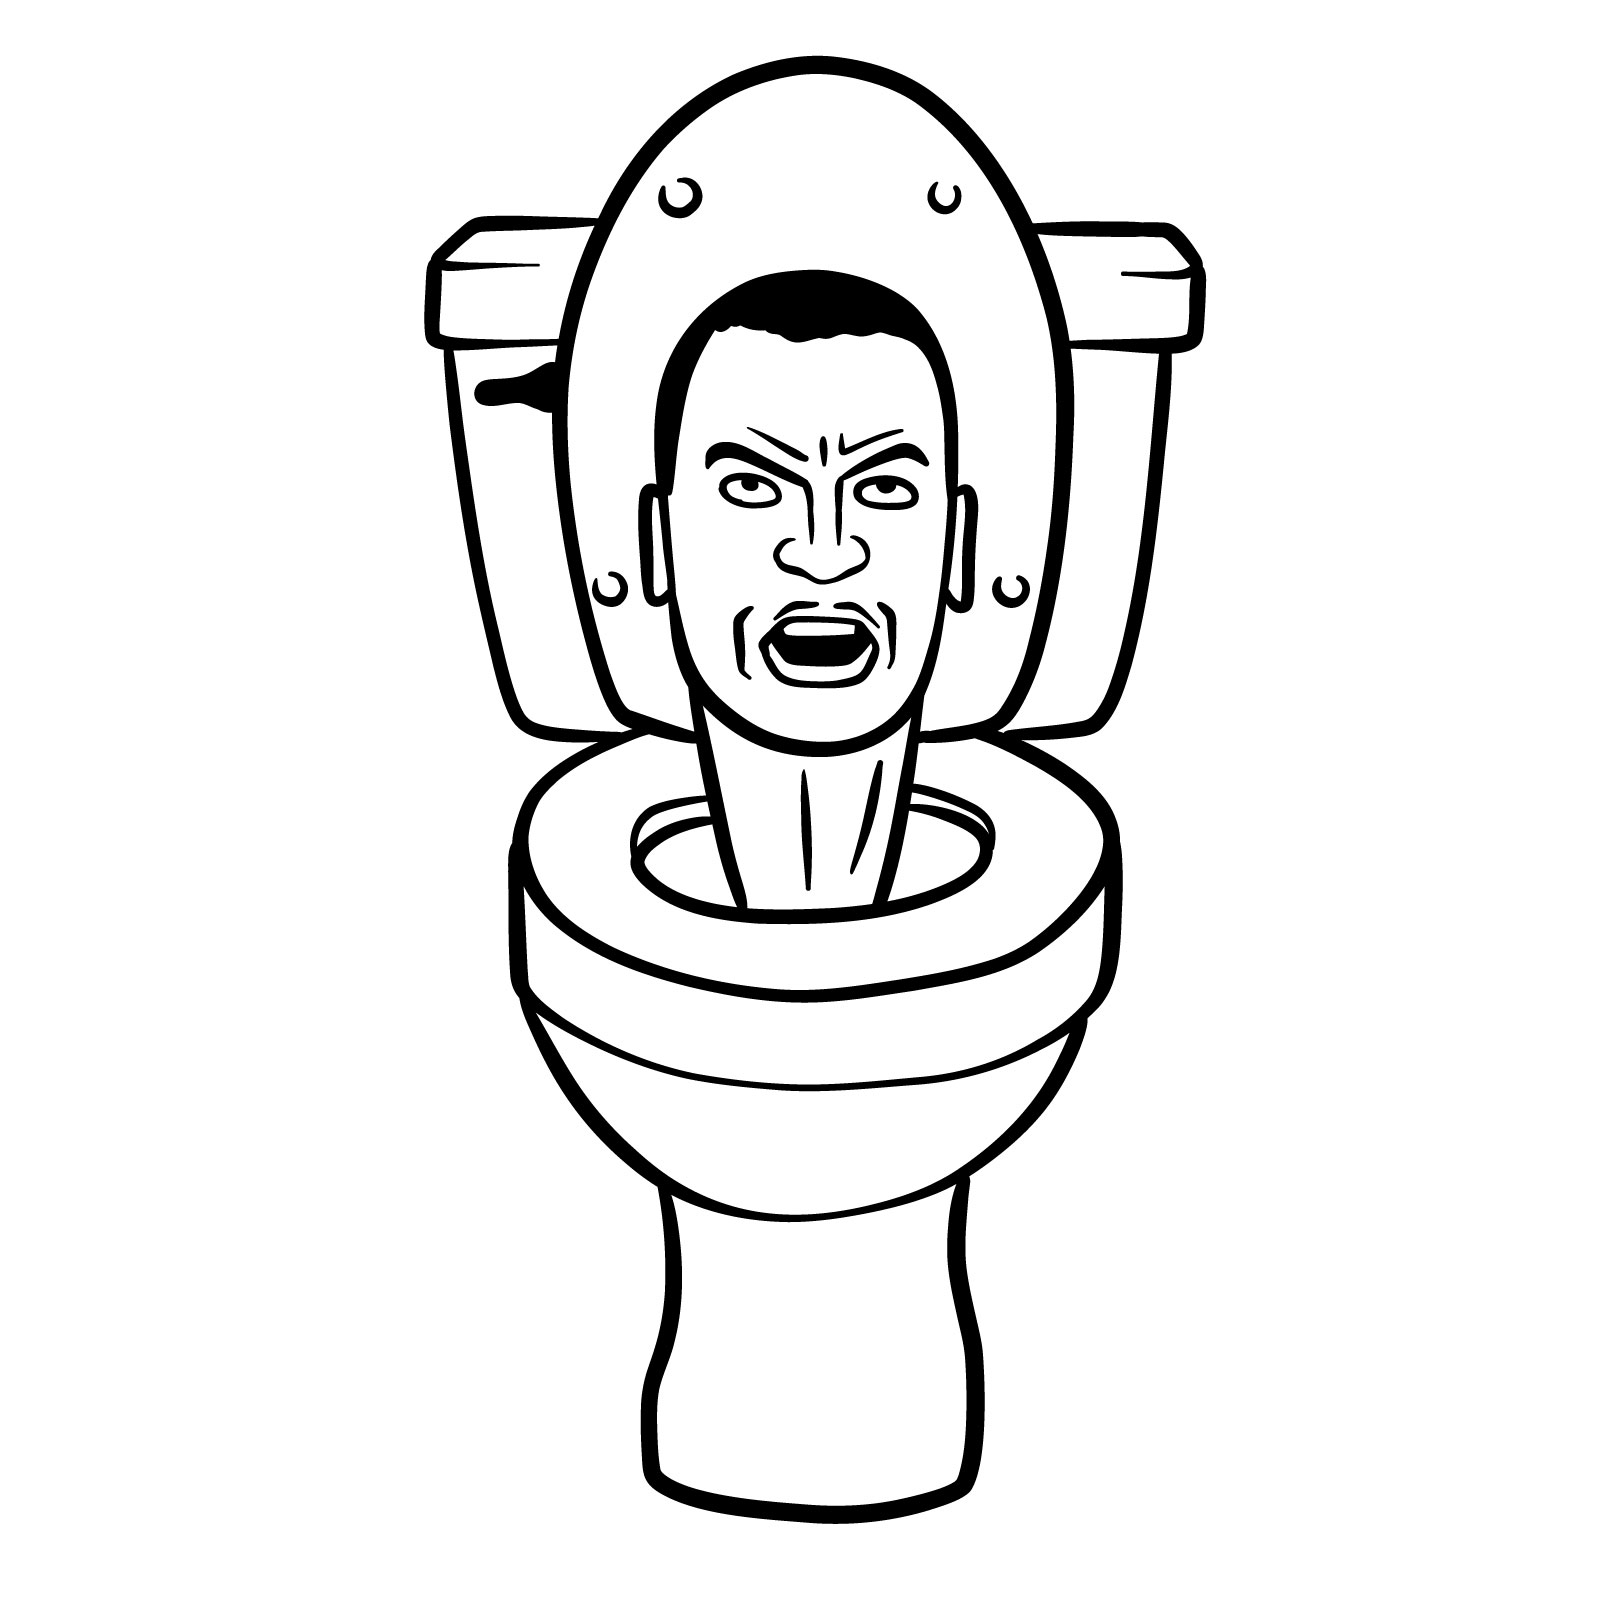 Completed line art of the Skibidi Toilet, ready for coloring - final step